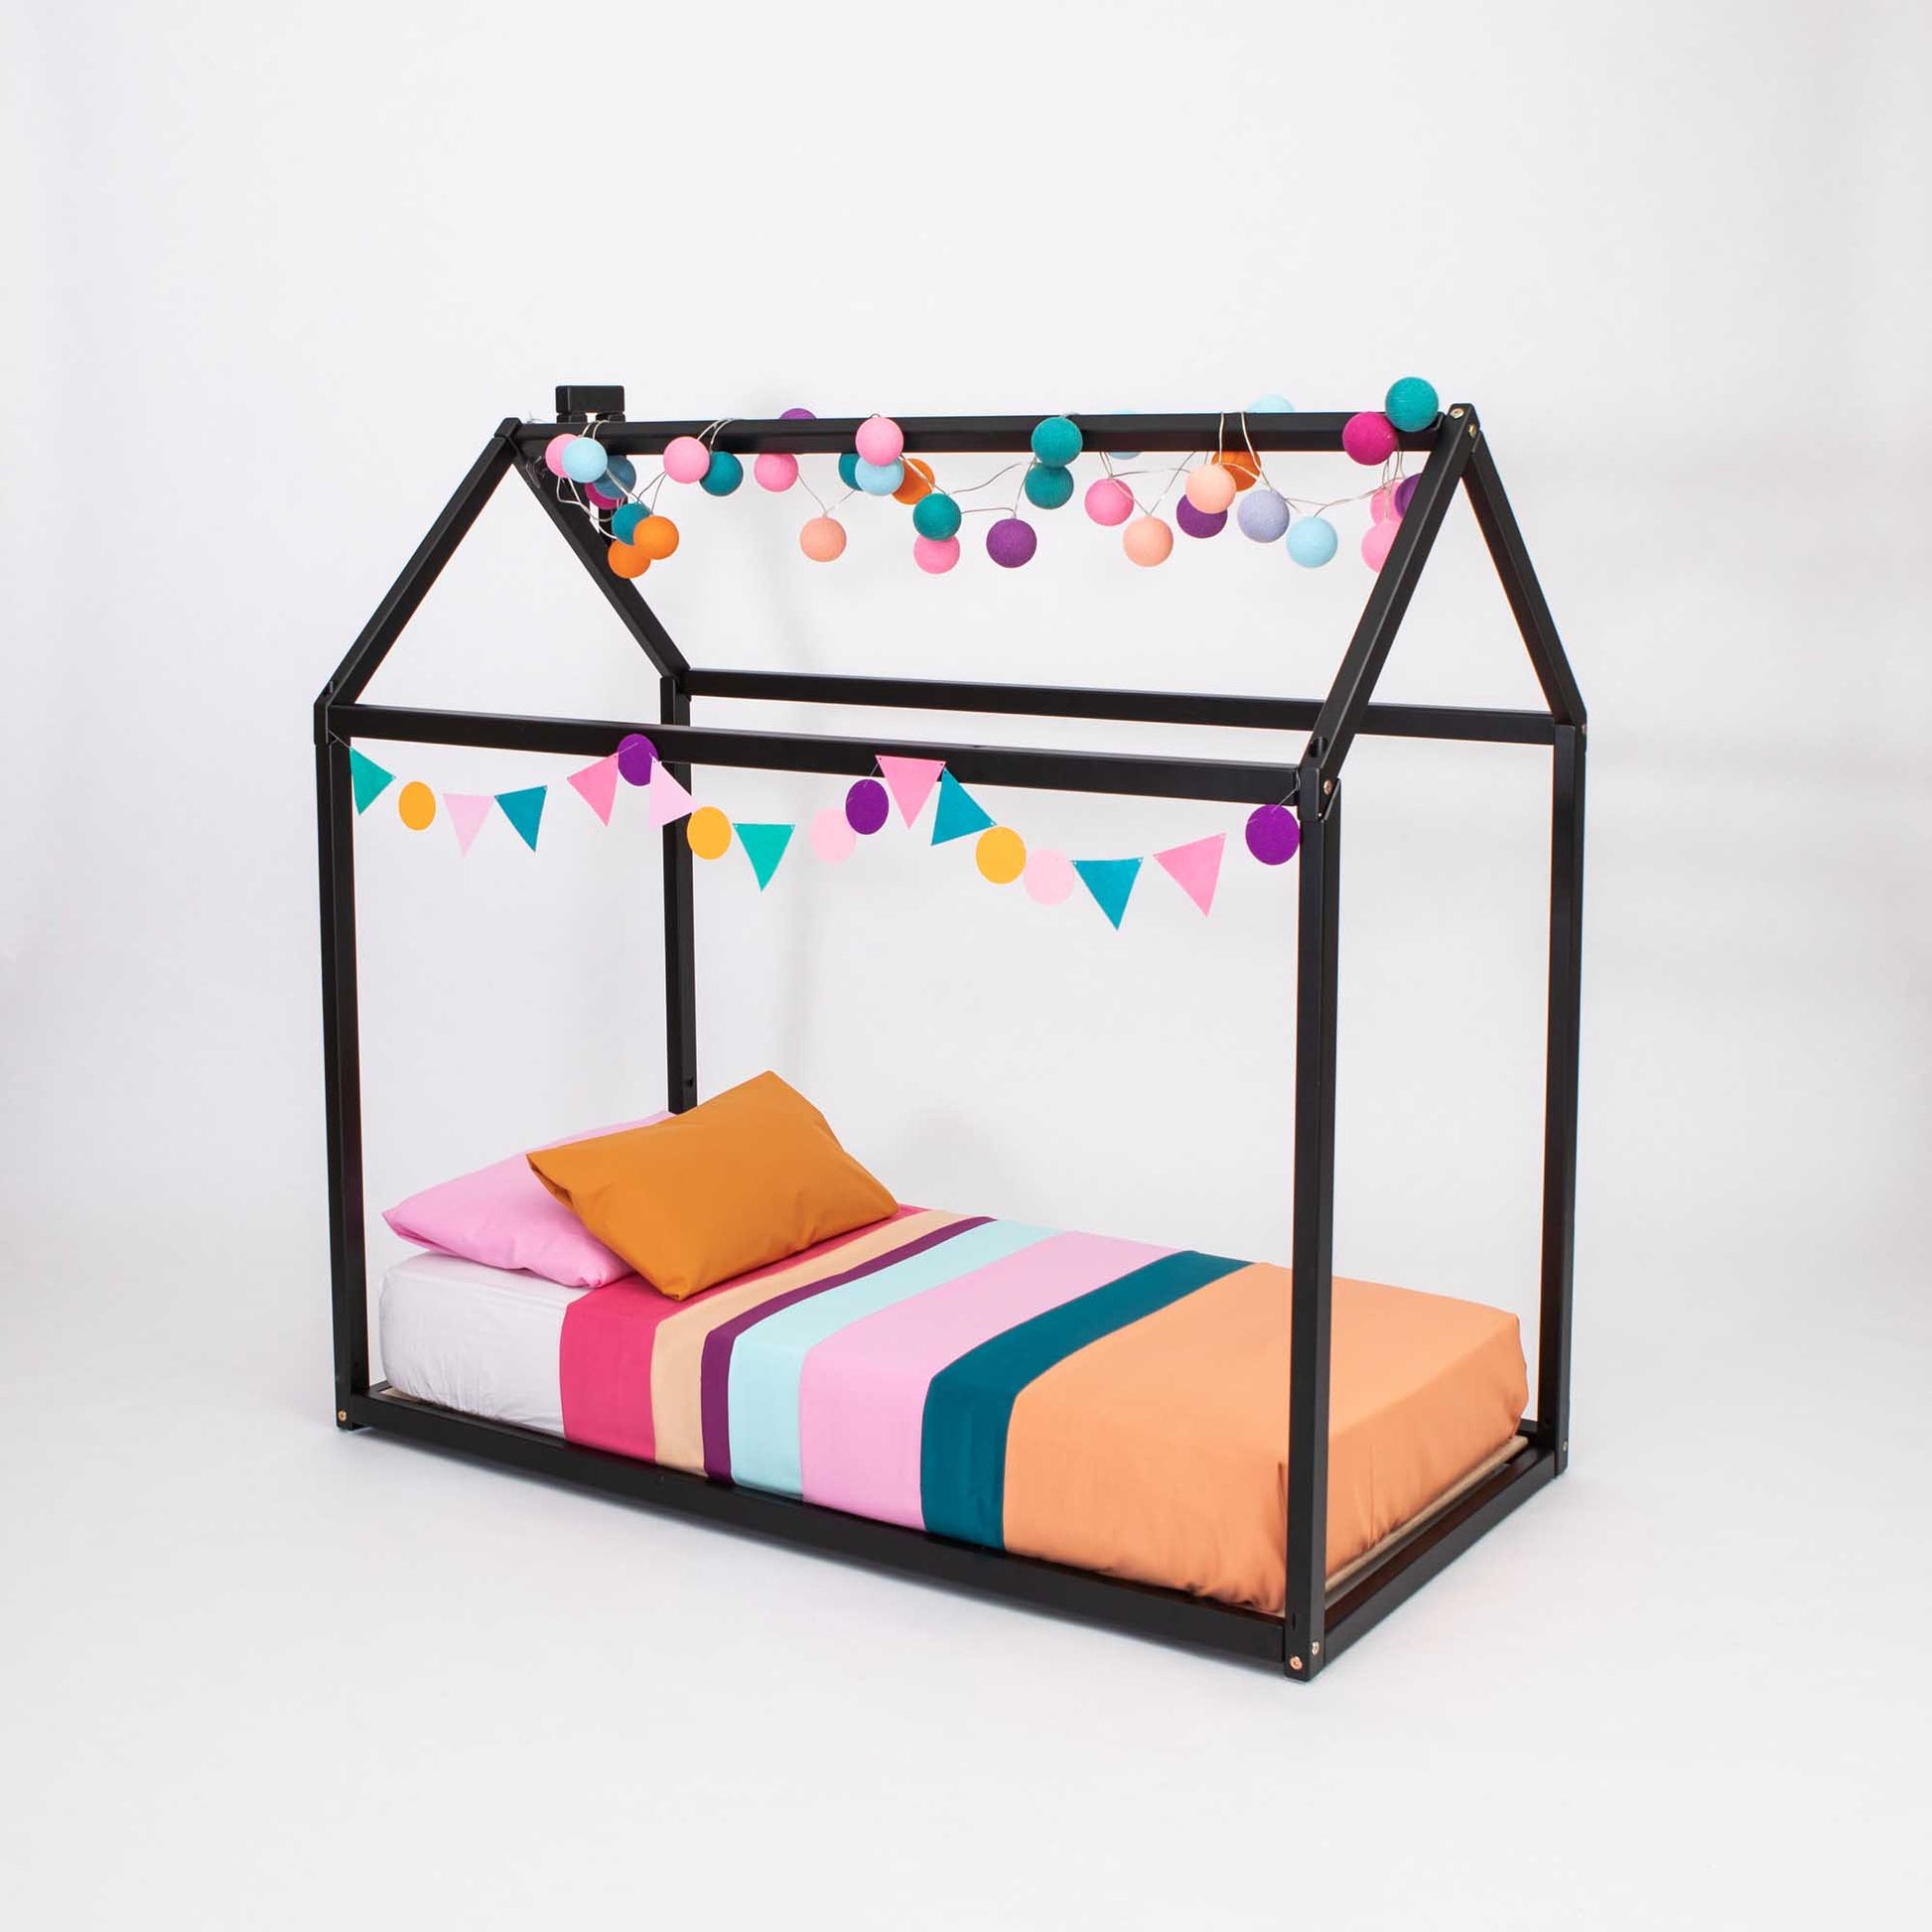 A Sweet Home From Wood Wooden zero-clearance house bed with a house-shaped canopy, providing a cozy sleep haven with colorful pom poms hanging from it.